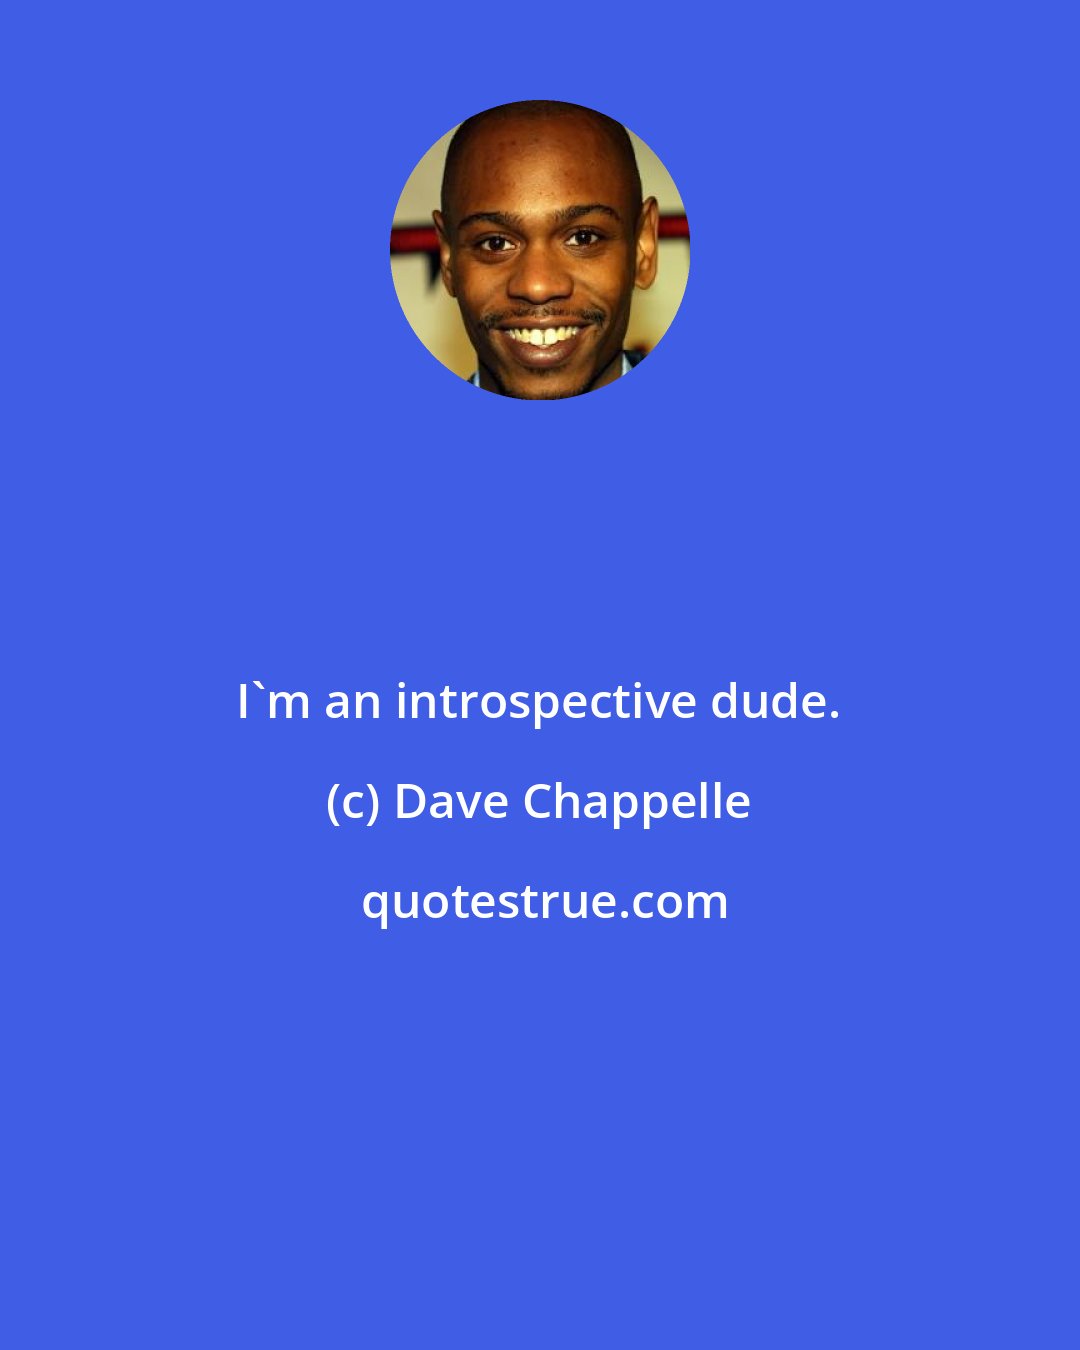 Dave Chappelle: I'm an introspective dude.